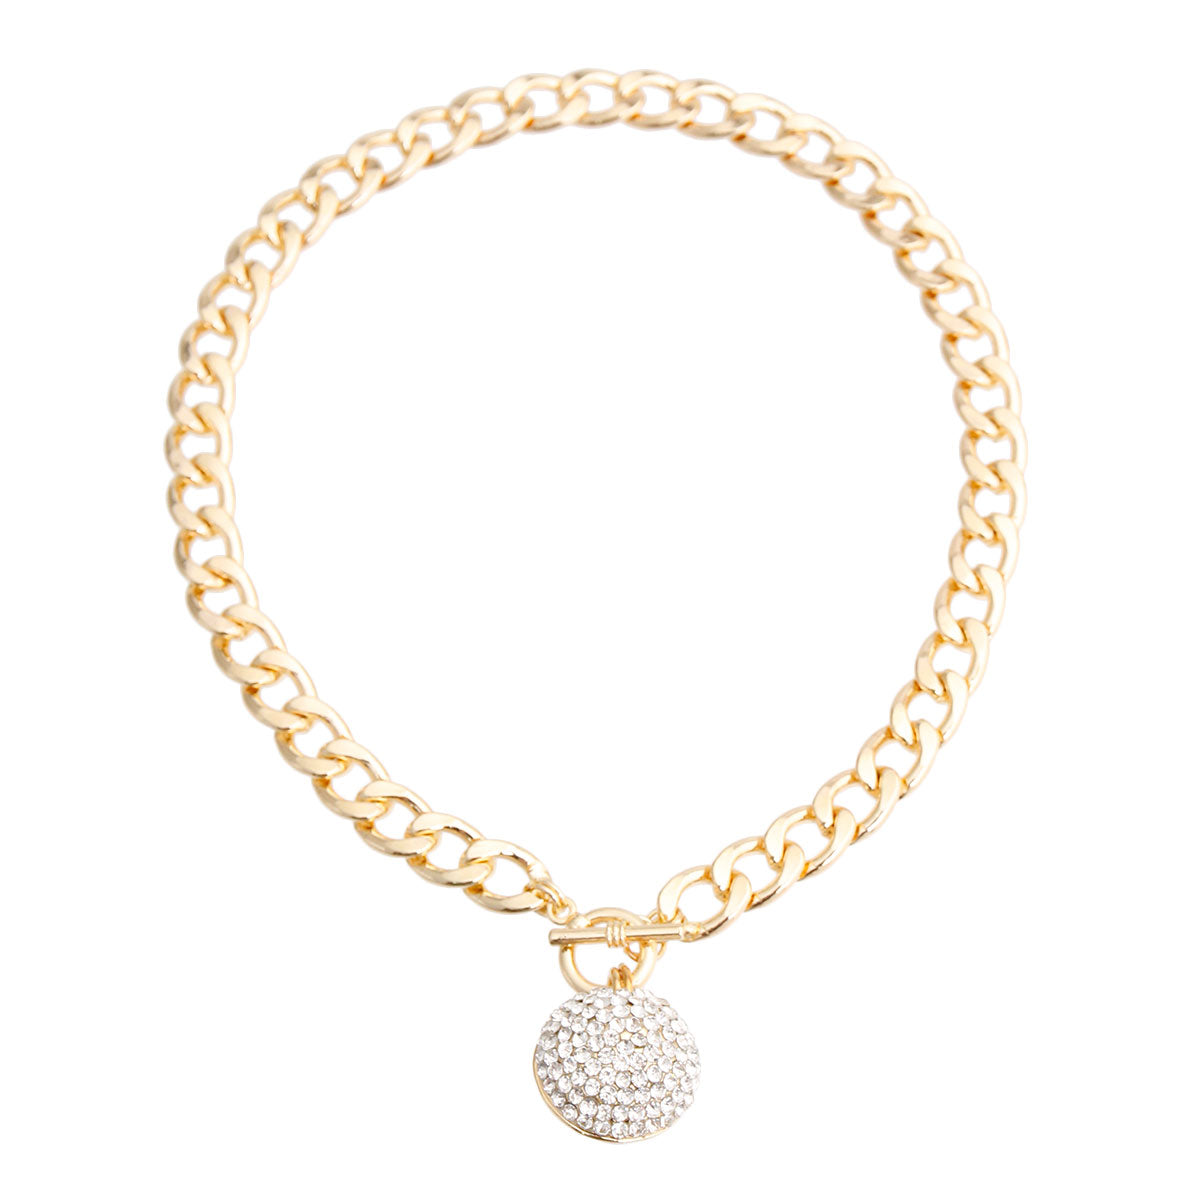 Gold Pave Ball Charm Necklace